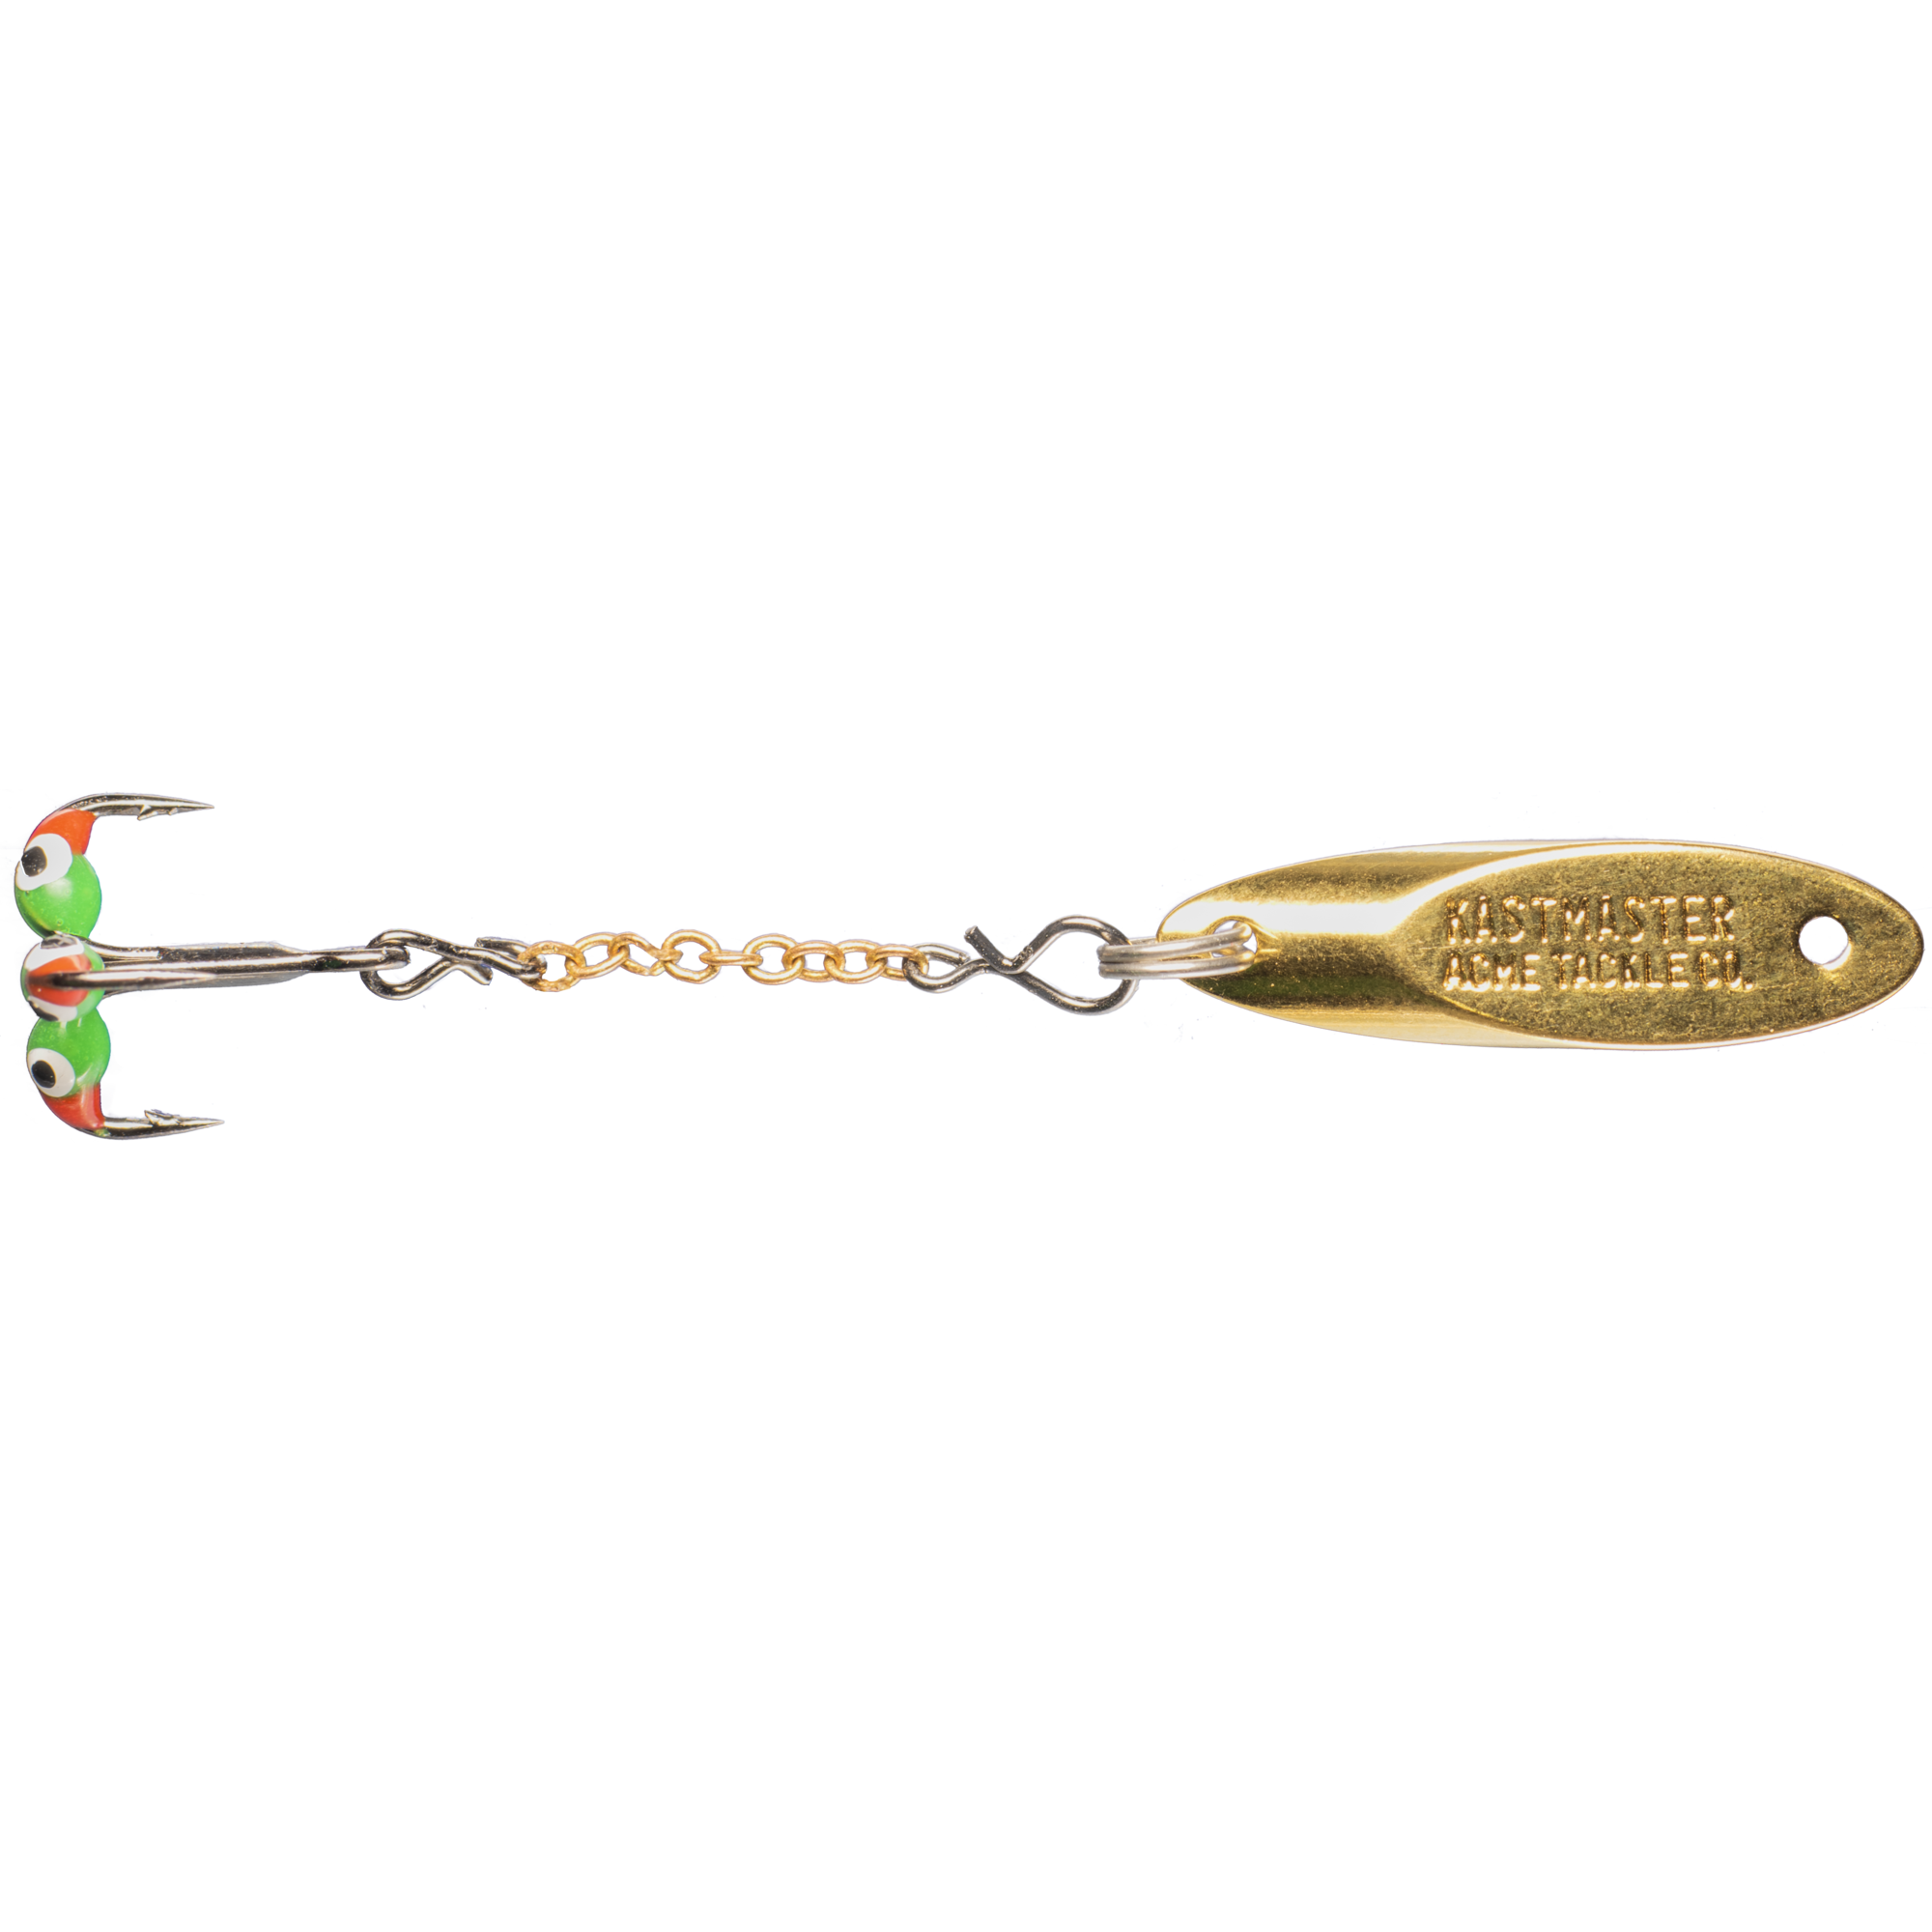 Acme Tackle D-Chain Kastmaster - Dick Smith's Live Bait & Tackle